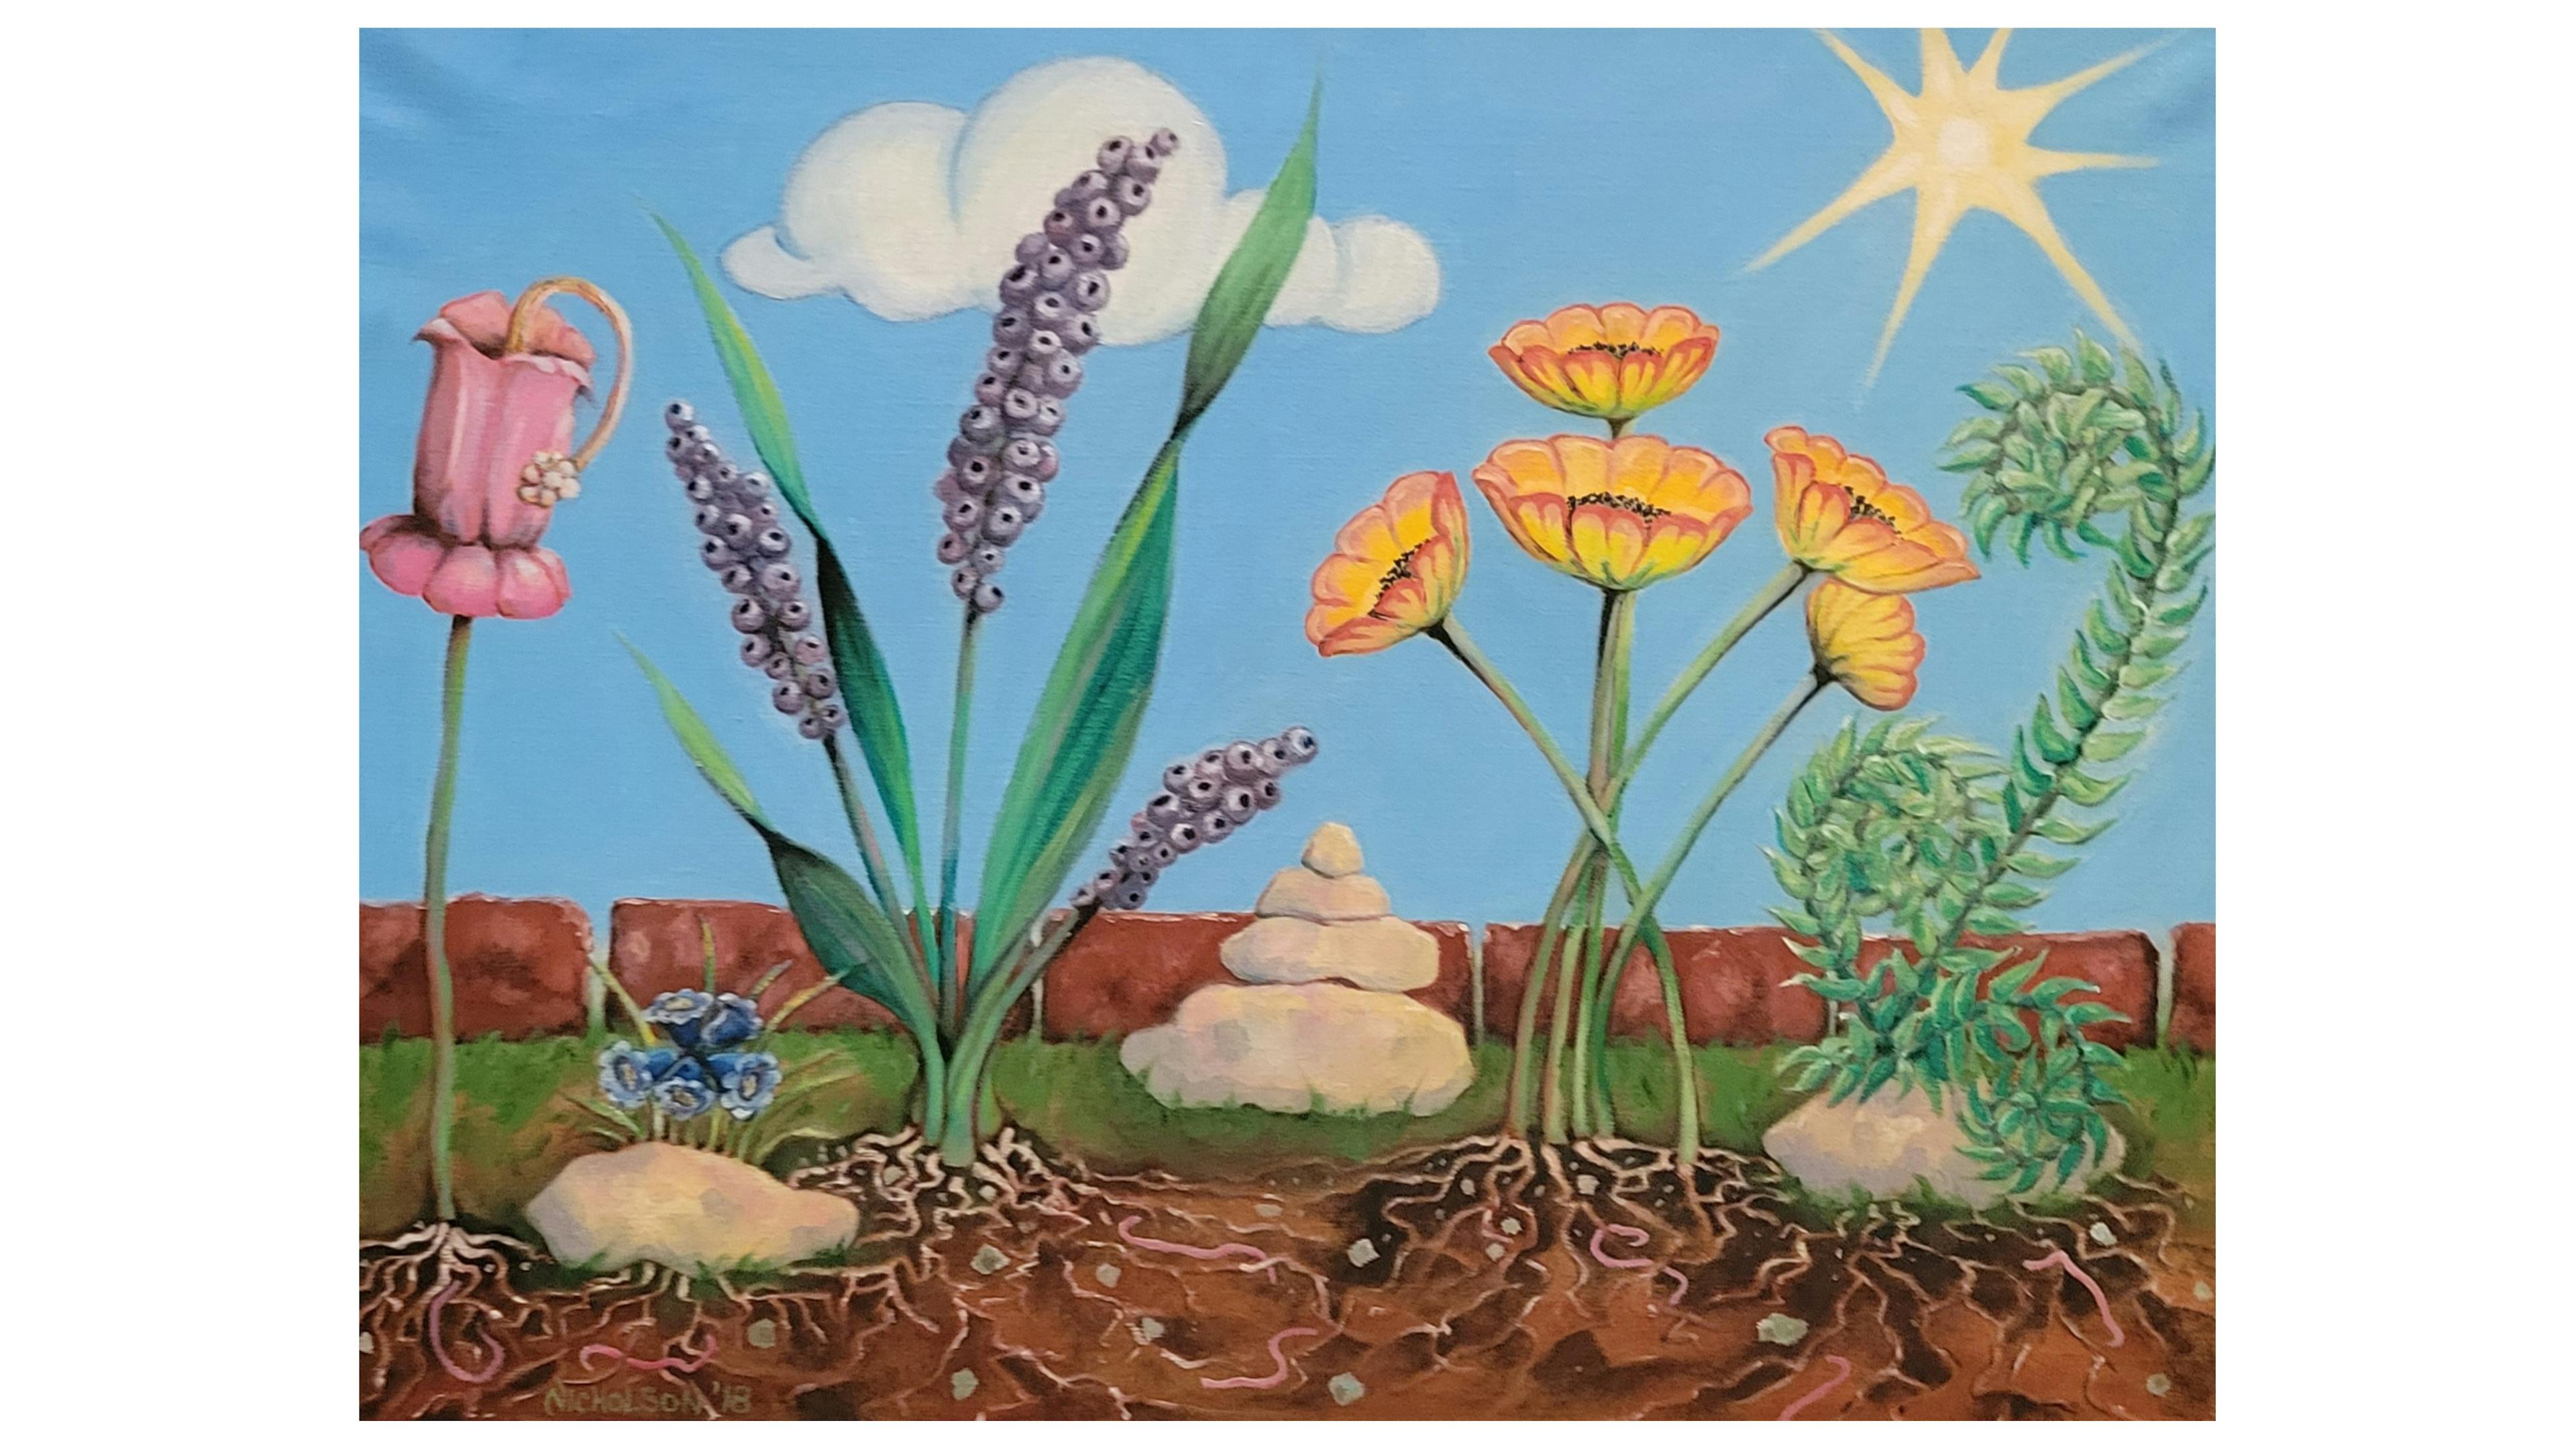 Oil Painting featuring a garden scene with stylized flowers in pink, blue, purple, and orangish yellow reach the sky, while stones, worms, and roots interweave below. A mix of color blending is prominent in this whimsical creation.